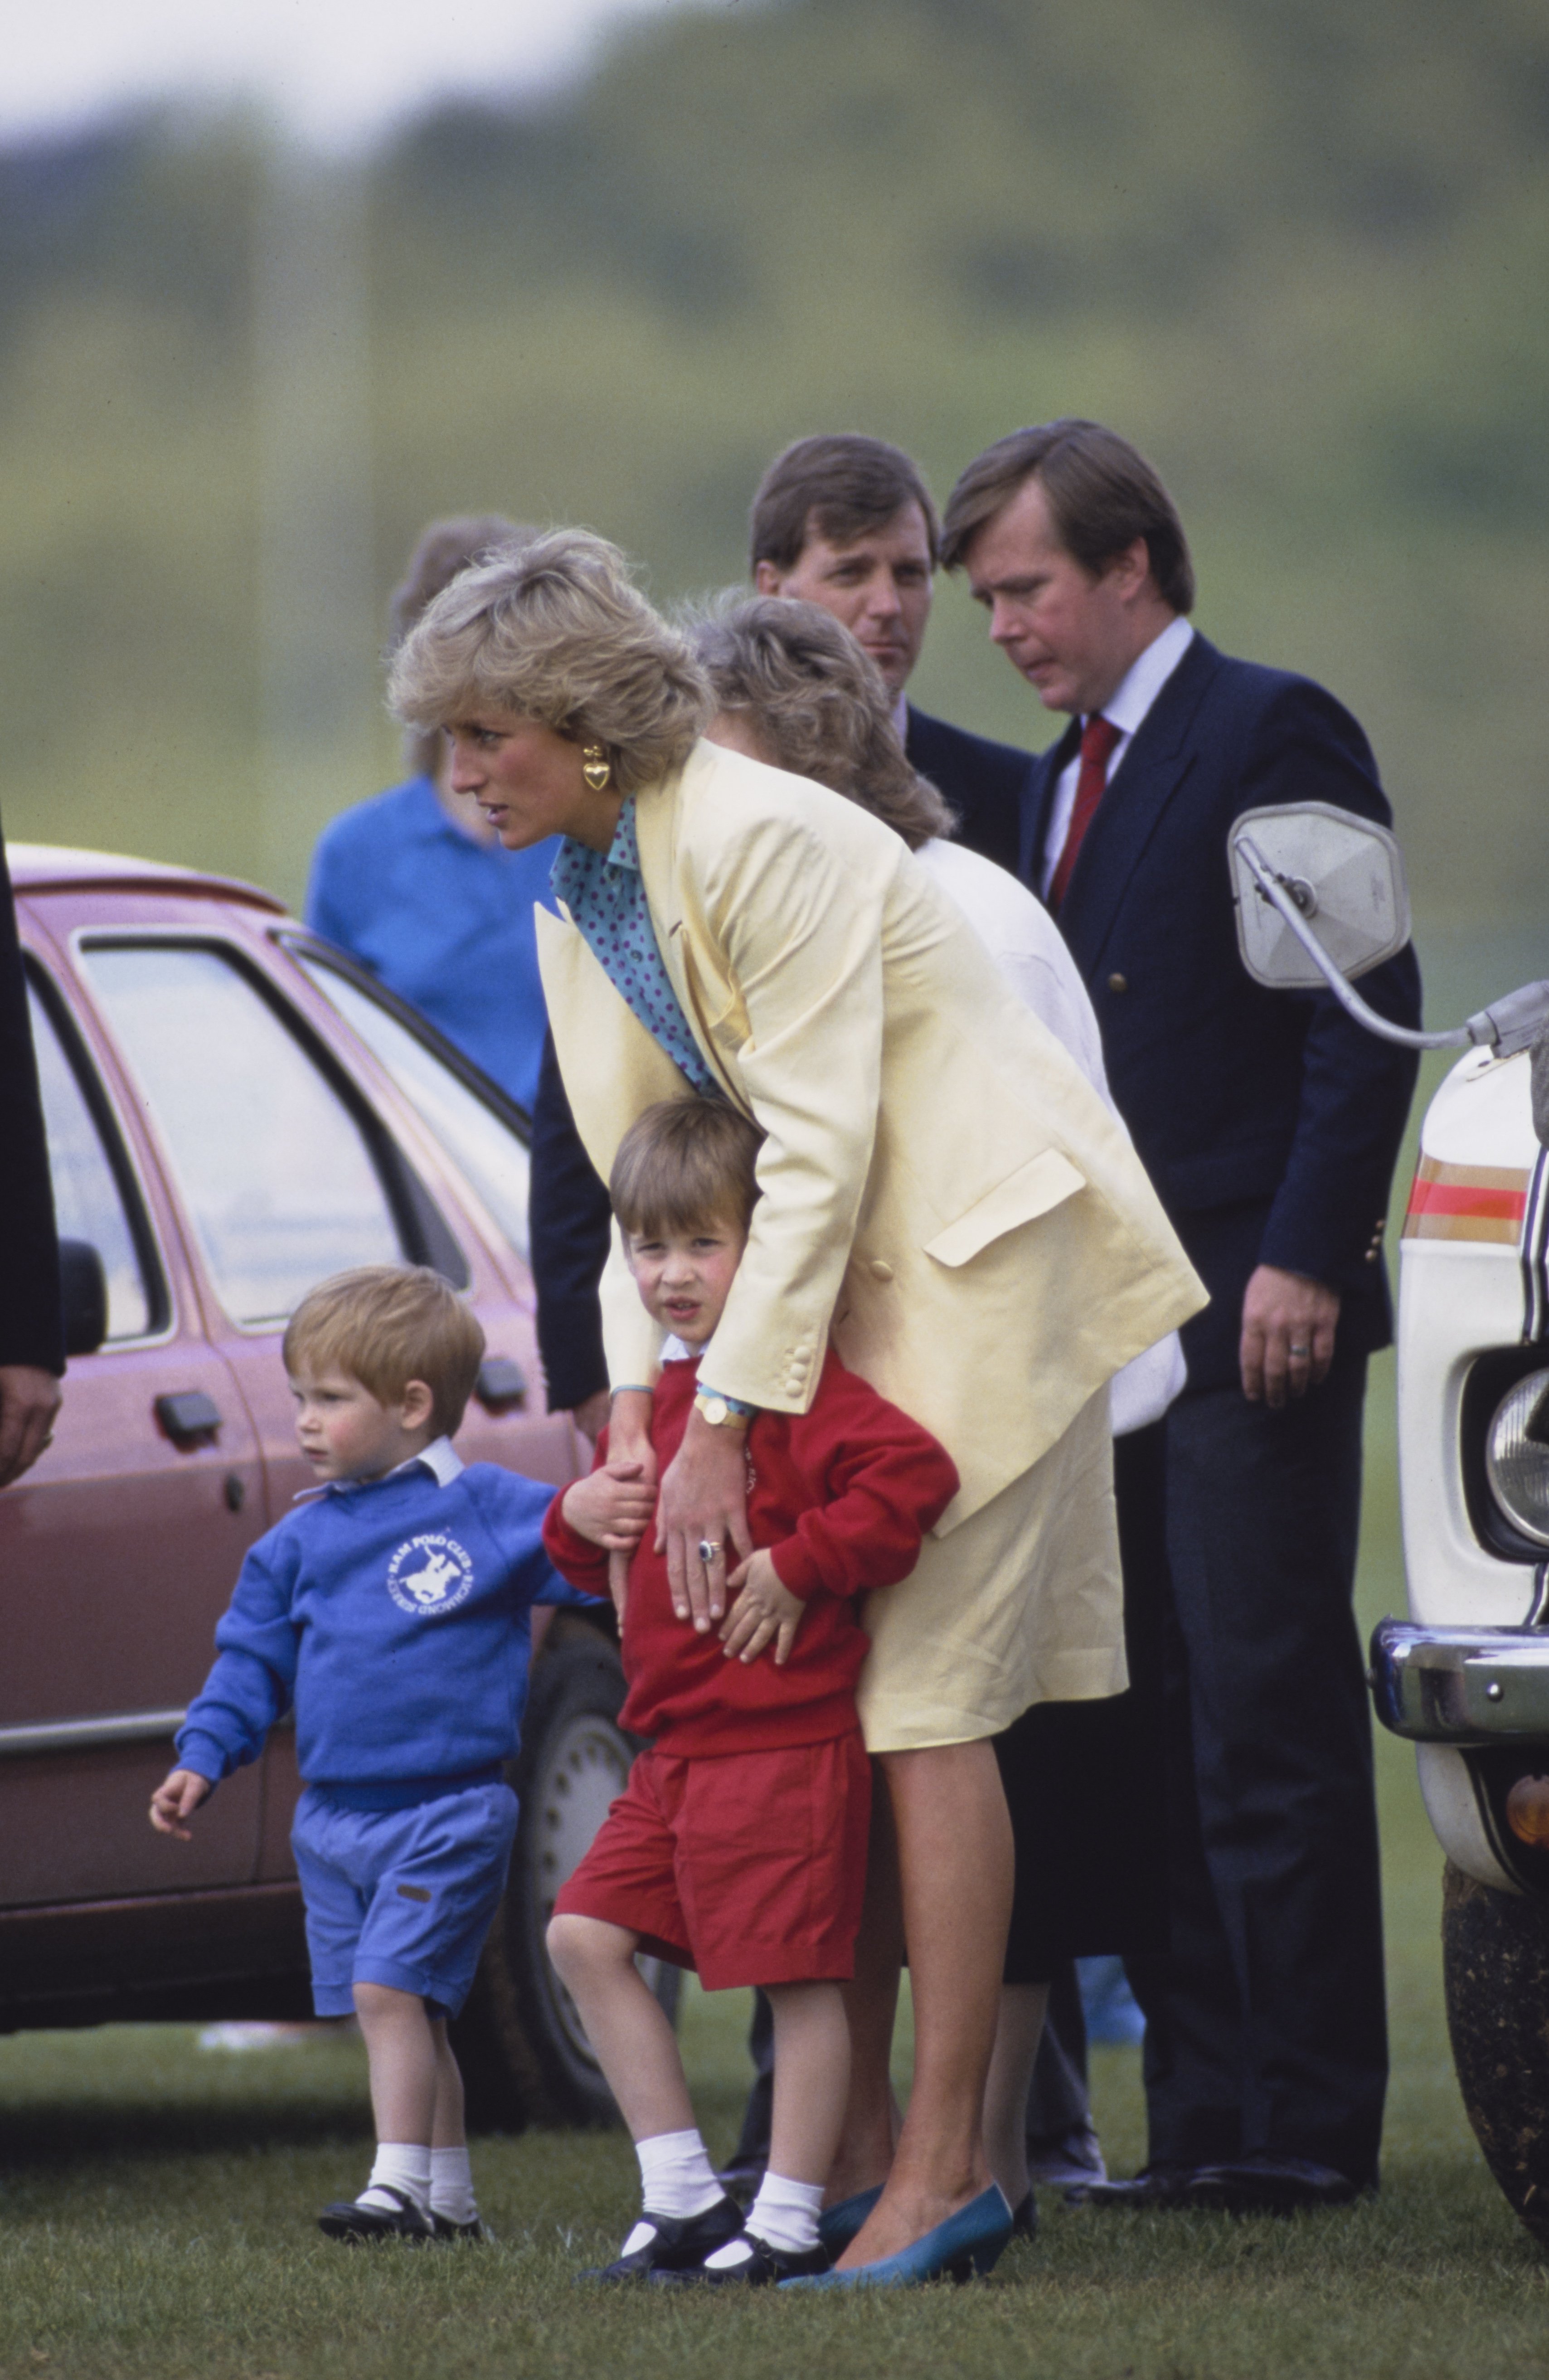 Diana, Princess of Wales (1961-1997), wearing a yellow suit with a Jasper Conran blouse, and her sons Prince Harry and Prince William at the Guards Polo Club at Smiths Lawn, in Windsor Great Park, Windsor, Berkshire, England, May 31, 1987. | Source: Getty Images